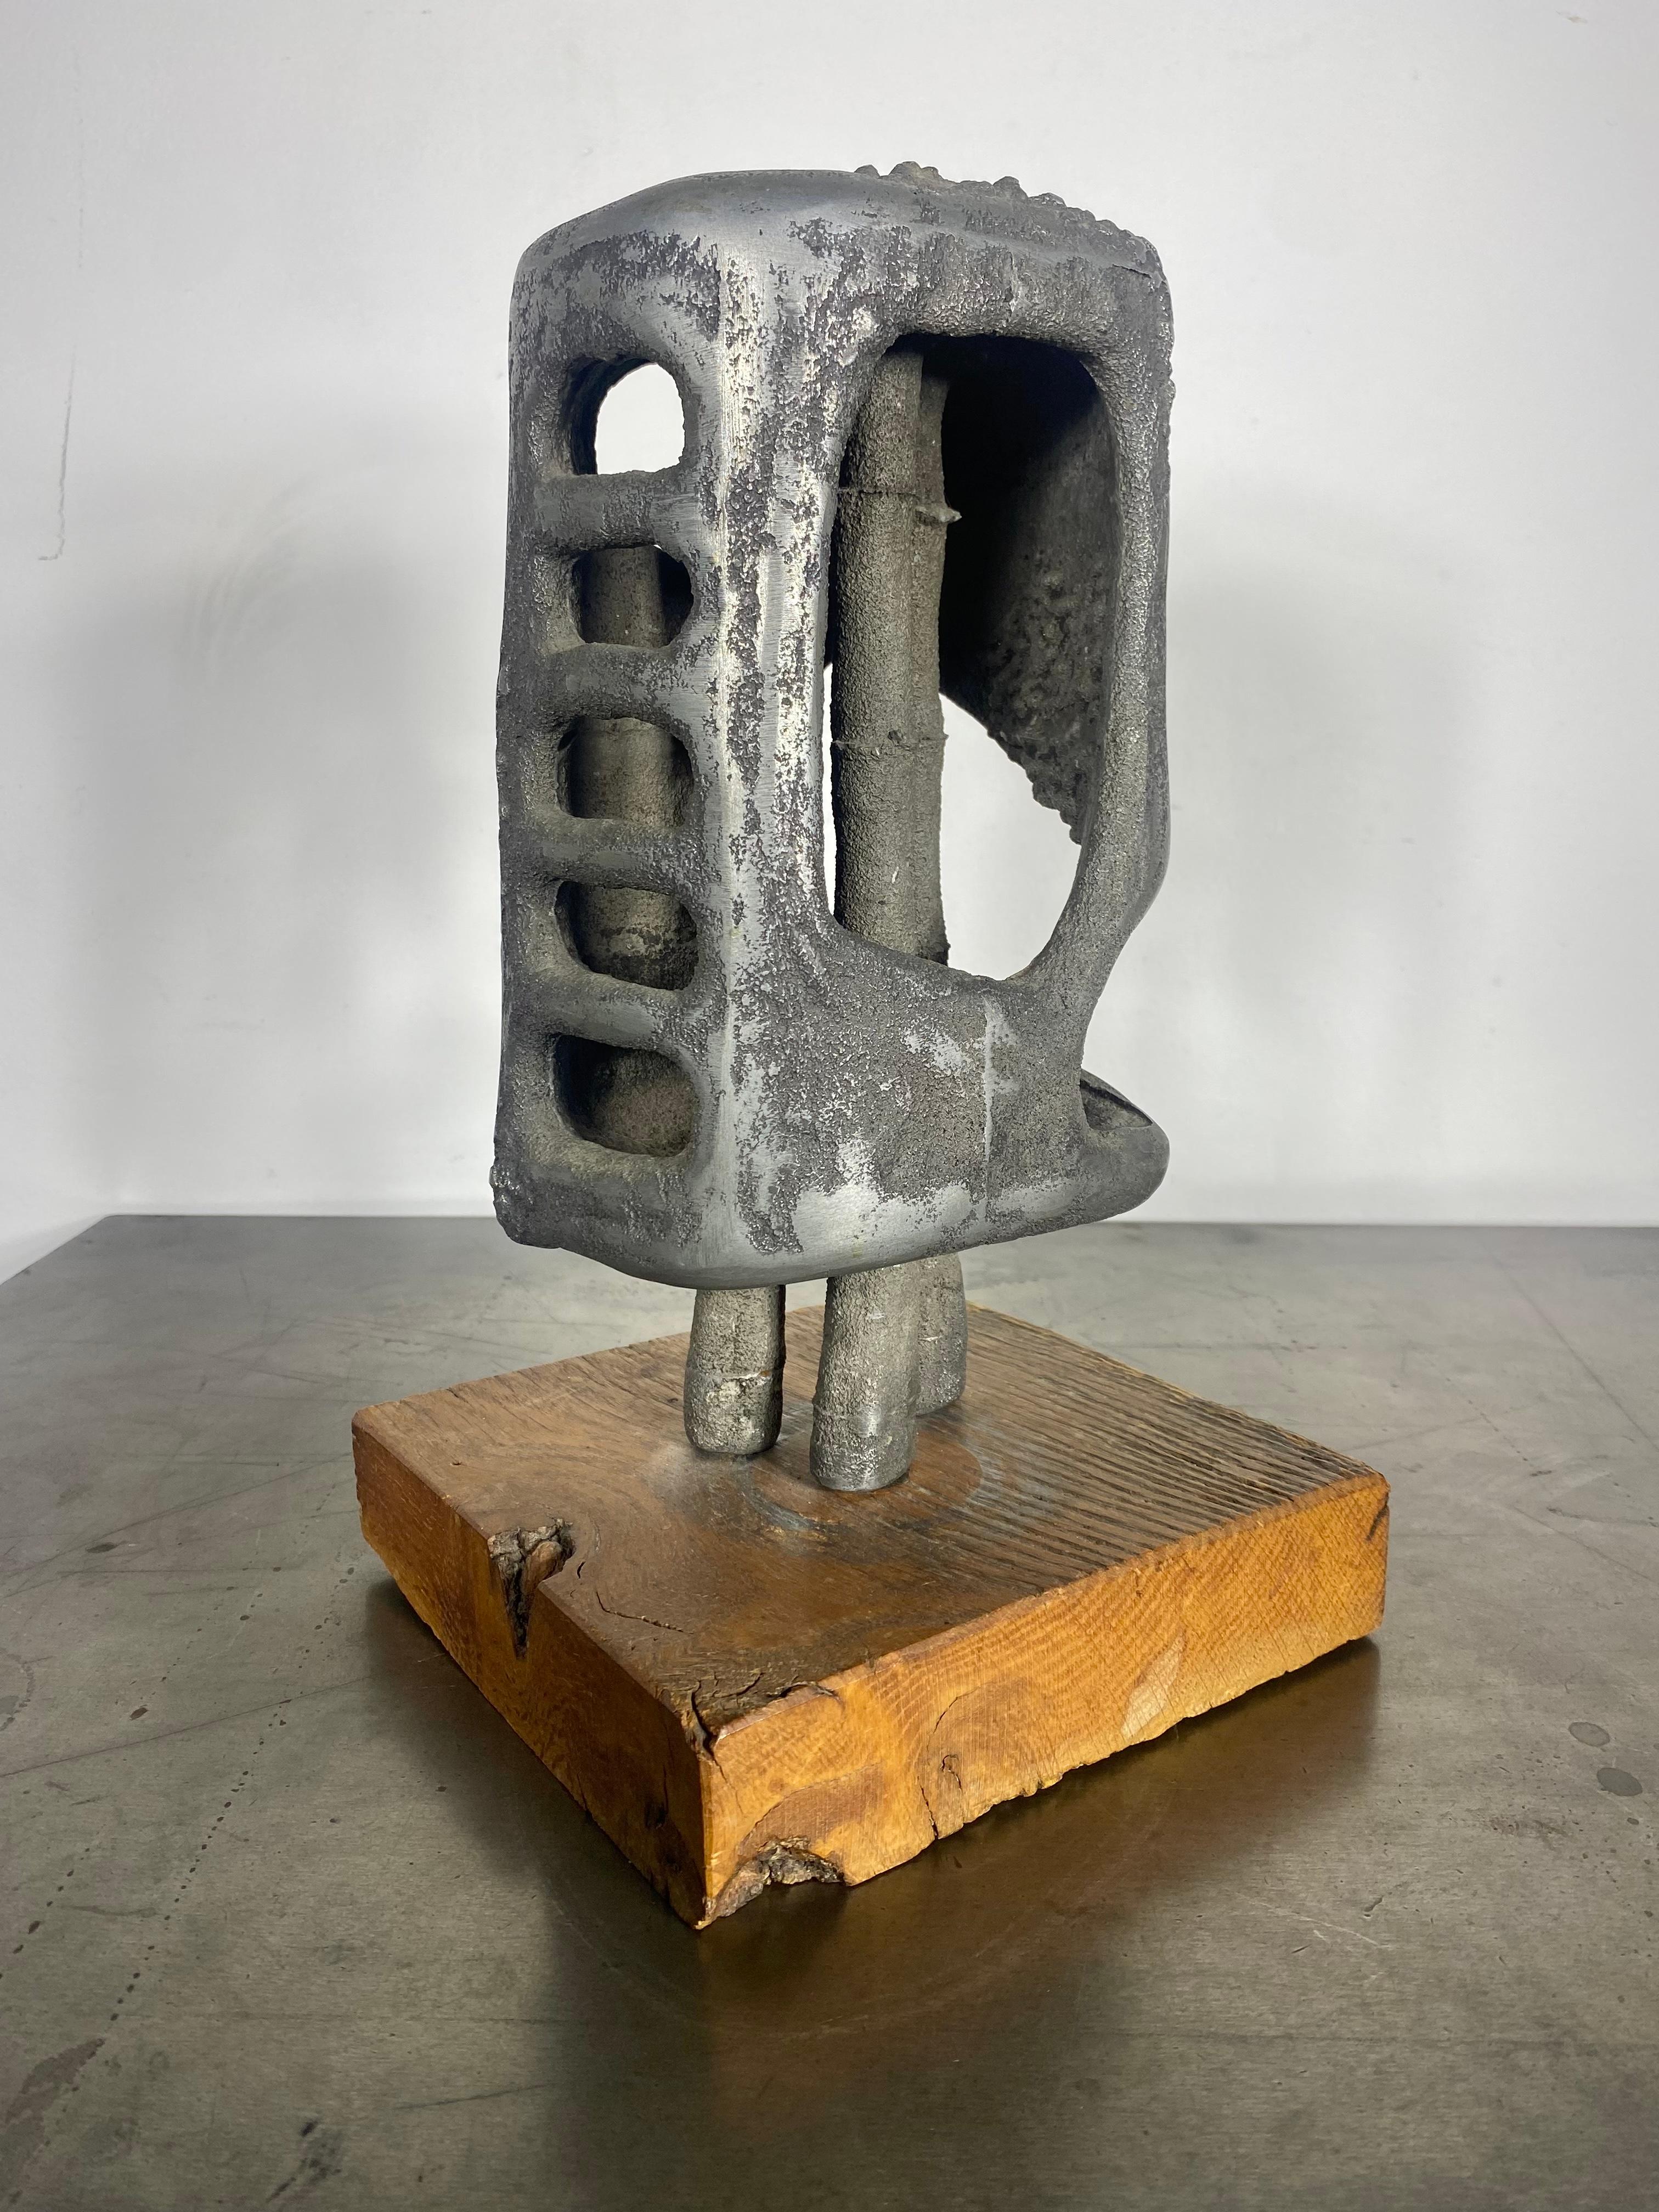 American mid-20th century modernist Brutalist abstract bust sculpture in cast and hand worked granulated and polished metal aluminum by award winning and well exhibited artist painter metal sculptor William F. Sellers ( 1929 - 2019 ) a contemporary